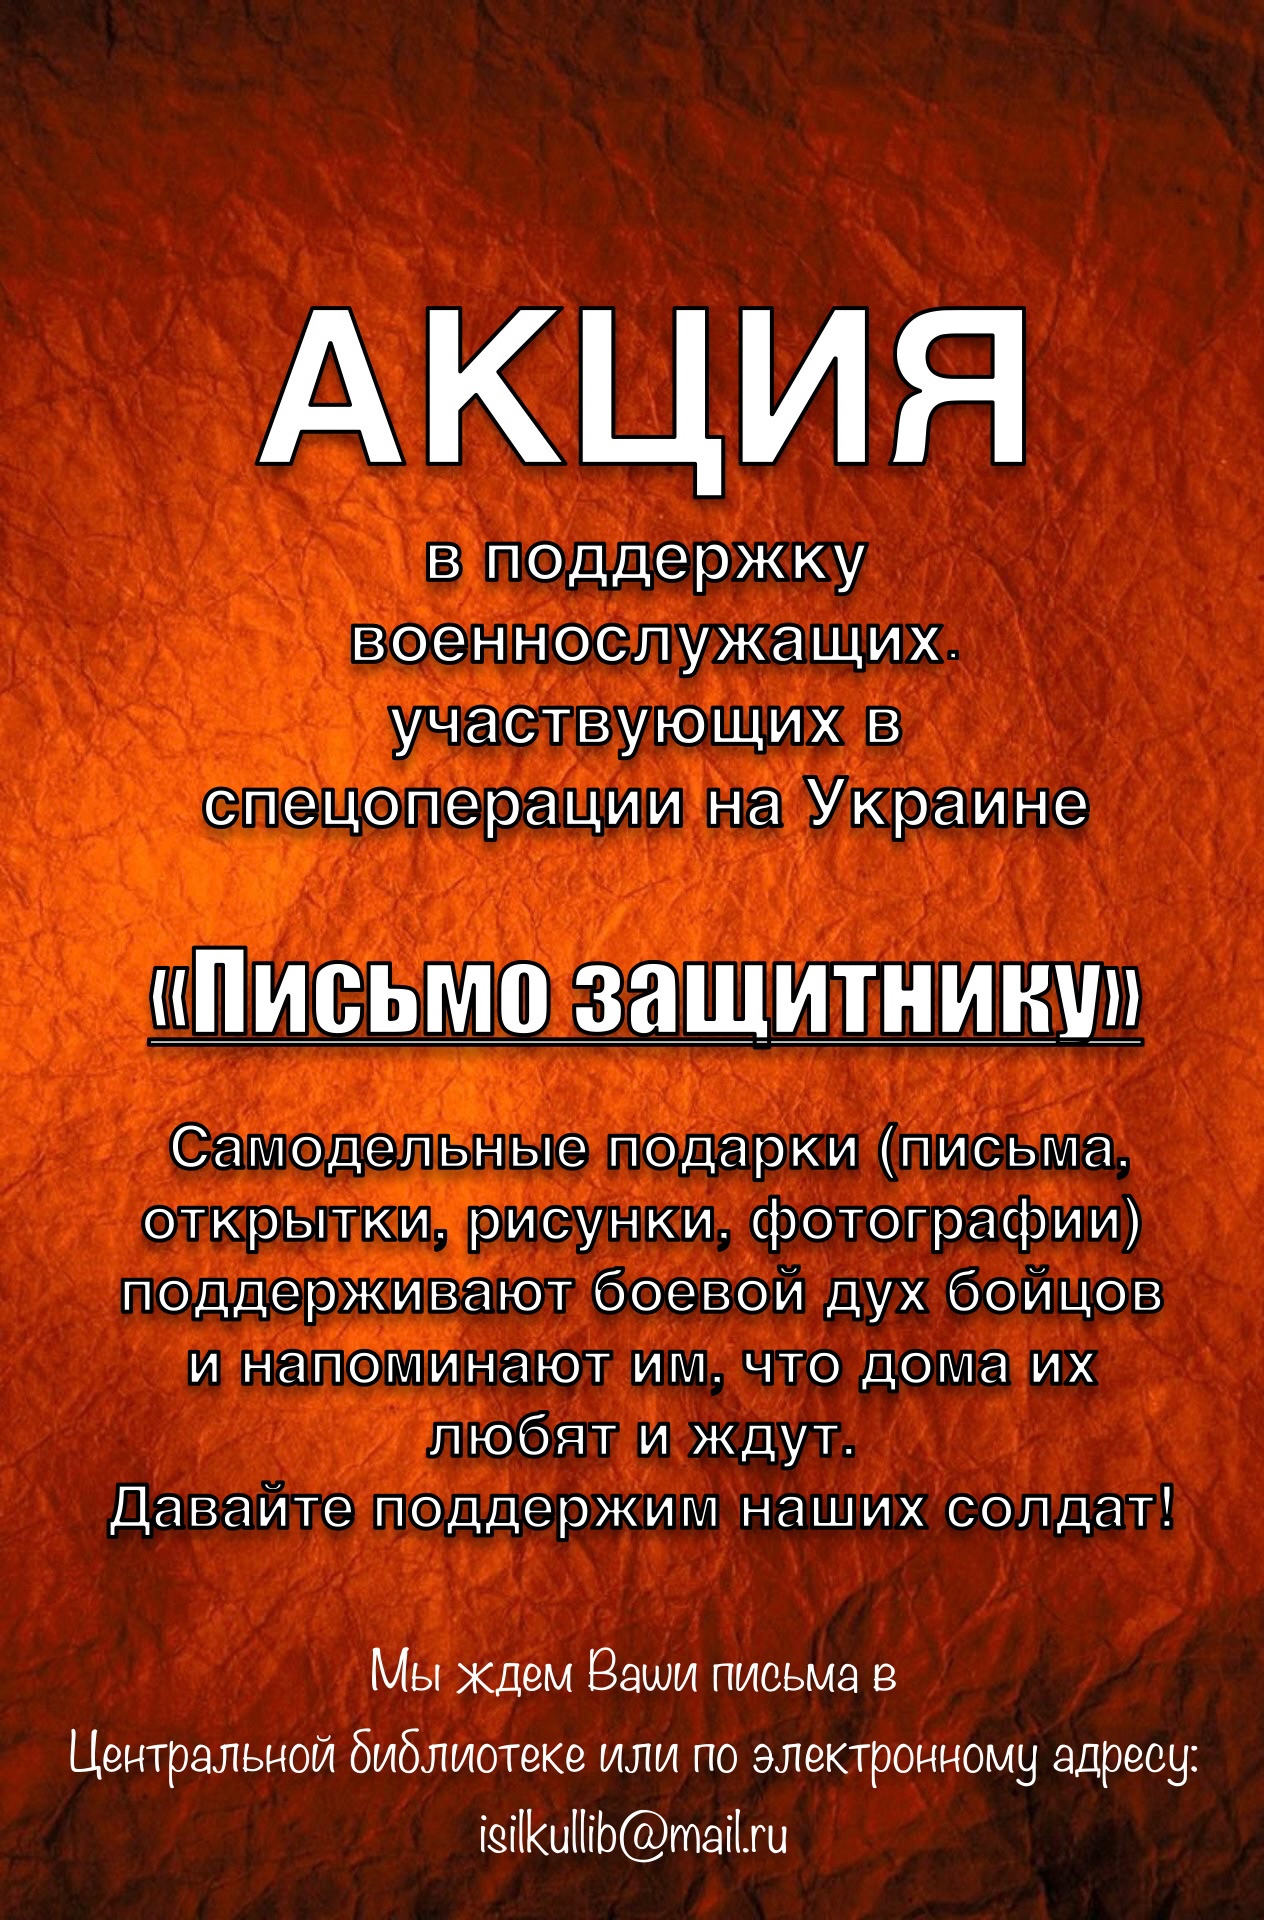 Read more about the article Акция “Письмо защитнику”